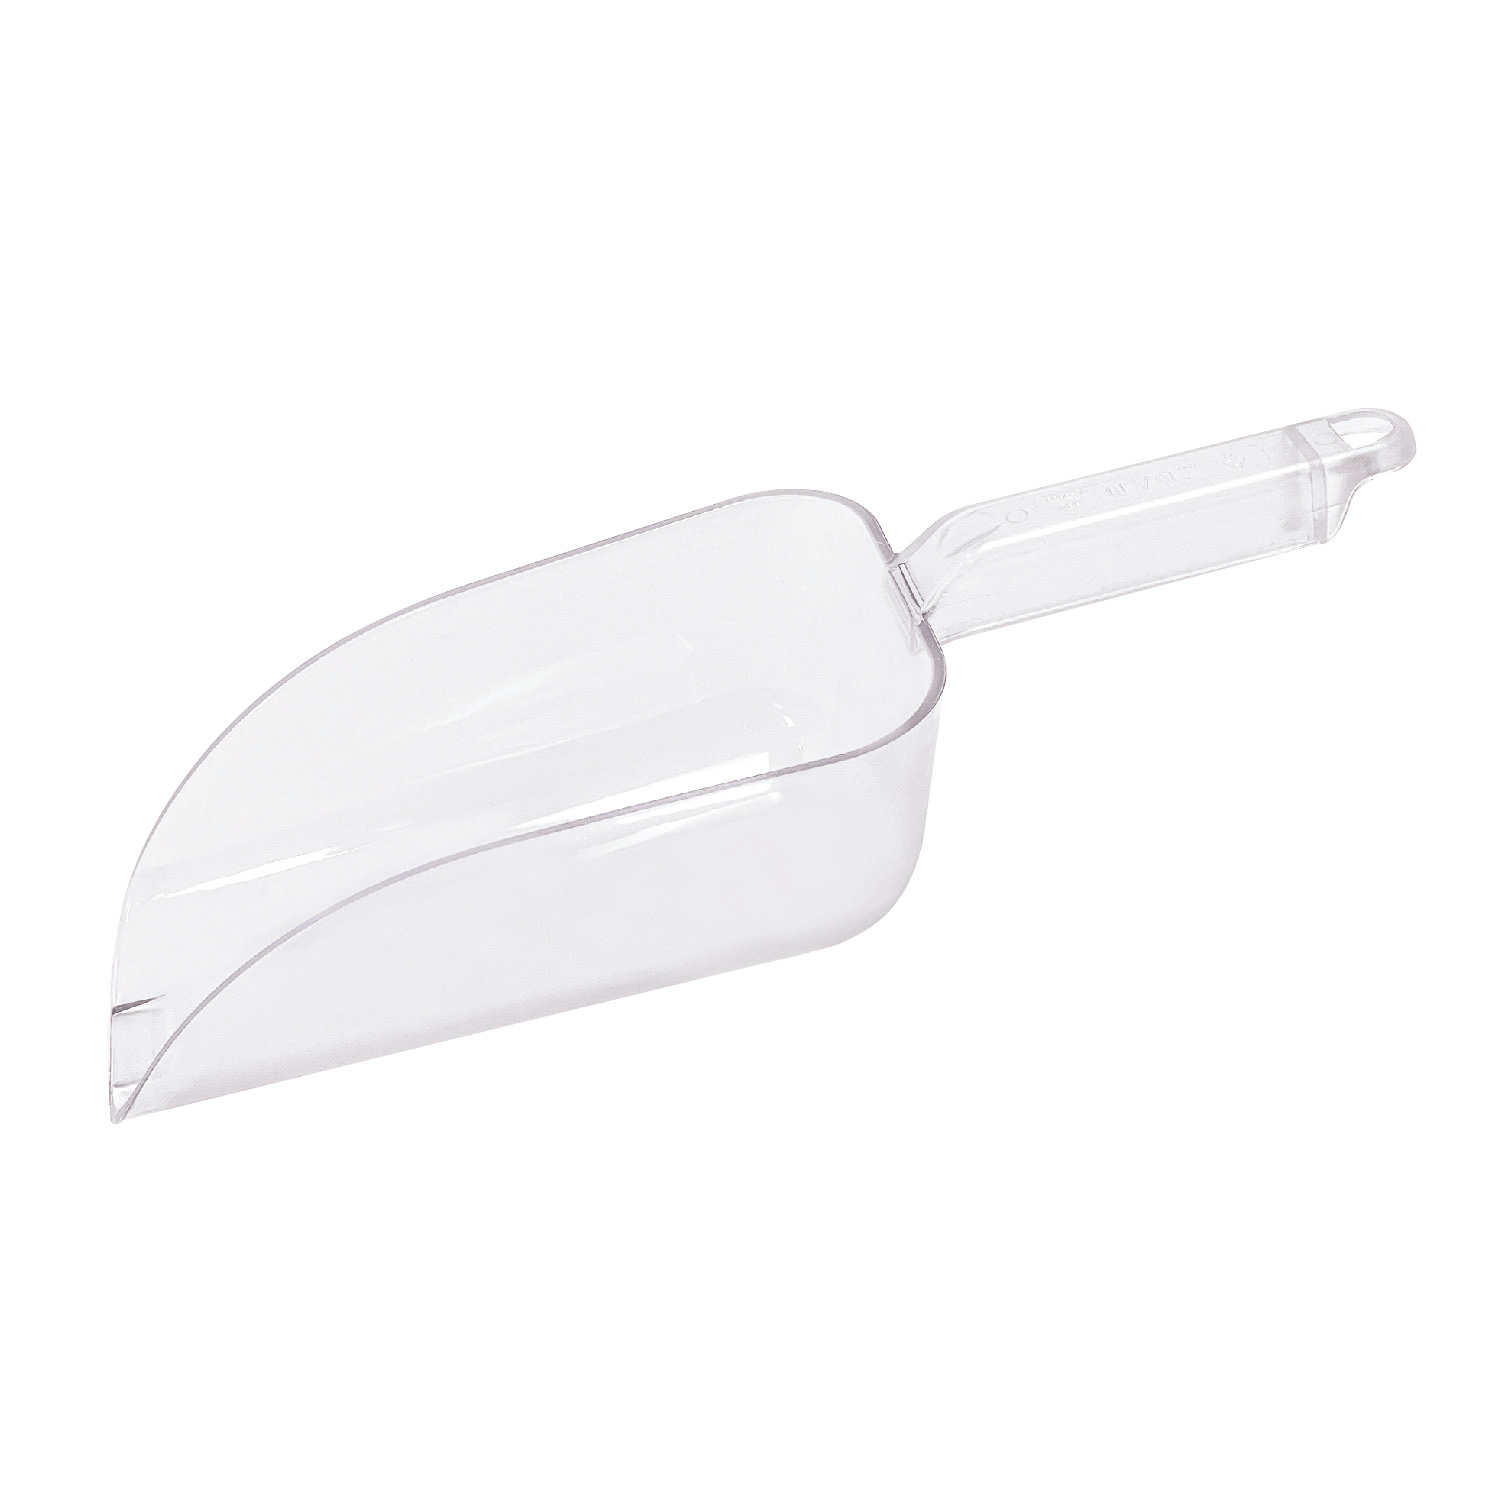 CAC China SCPP-32 Clear Polycarbonate Scoop 32 oz.